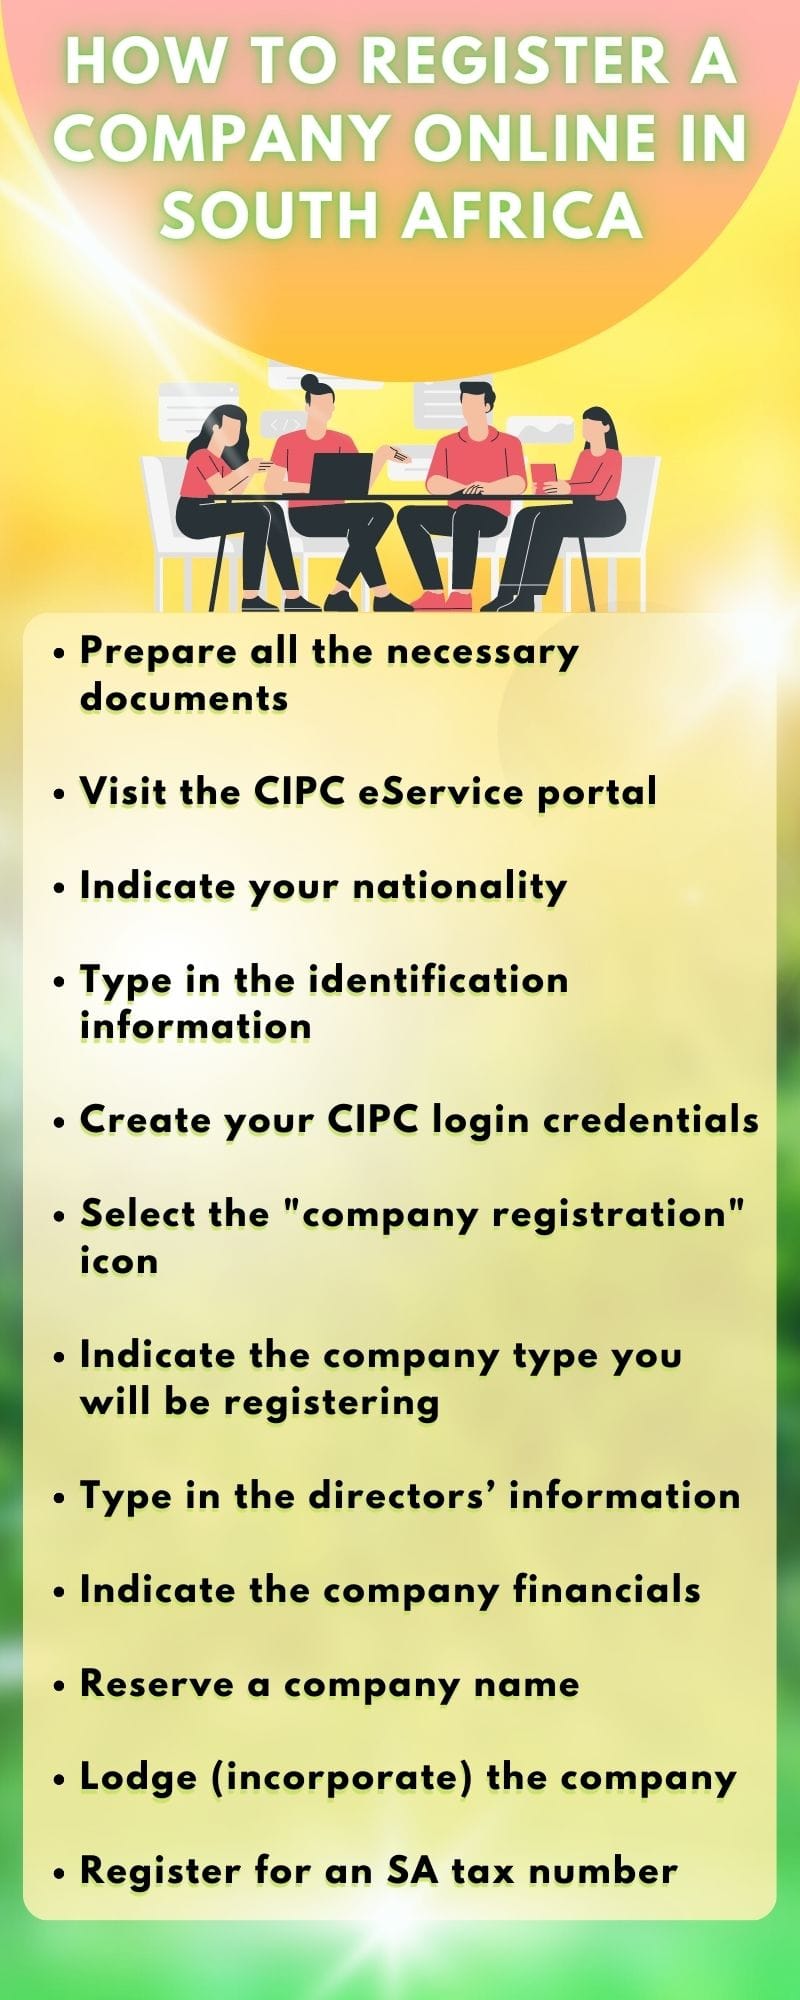 How to register a company online in South Africa